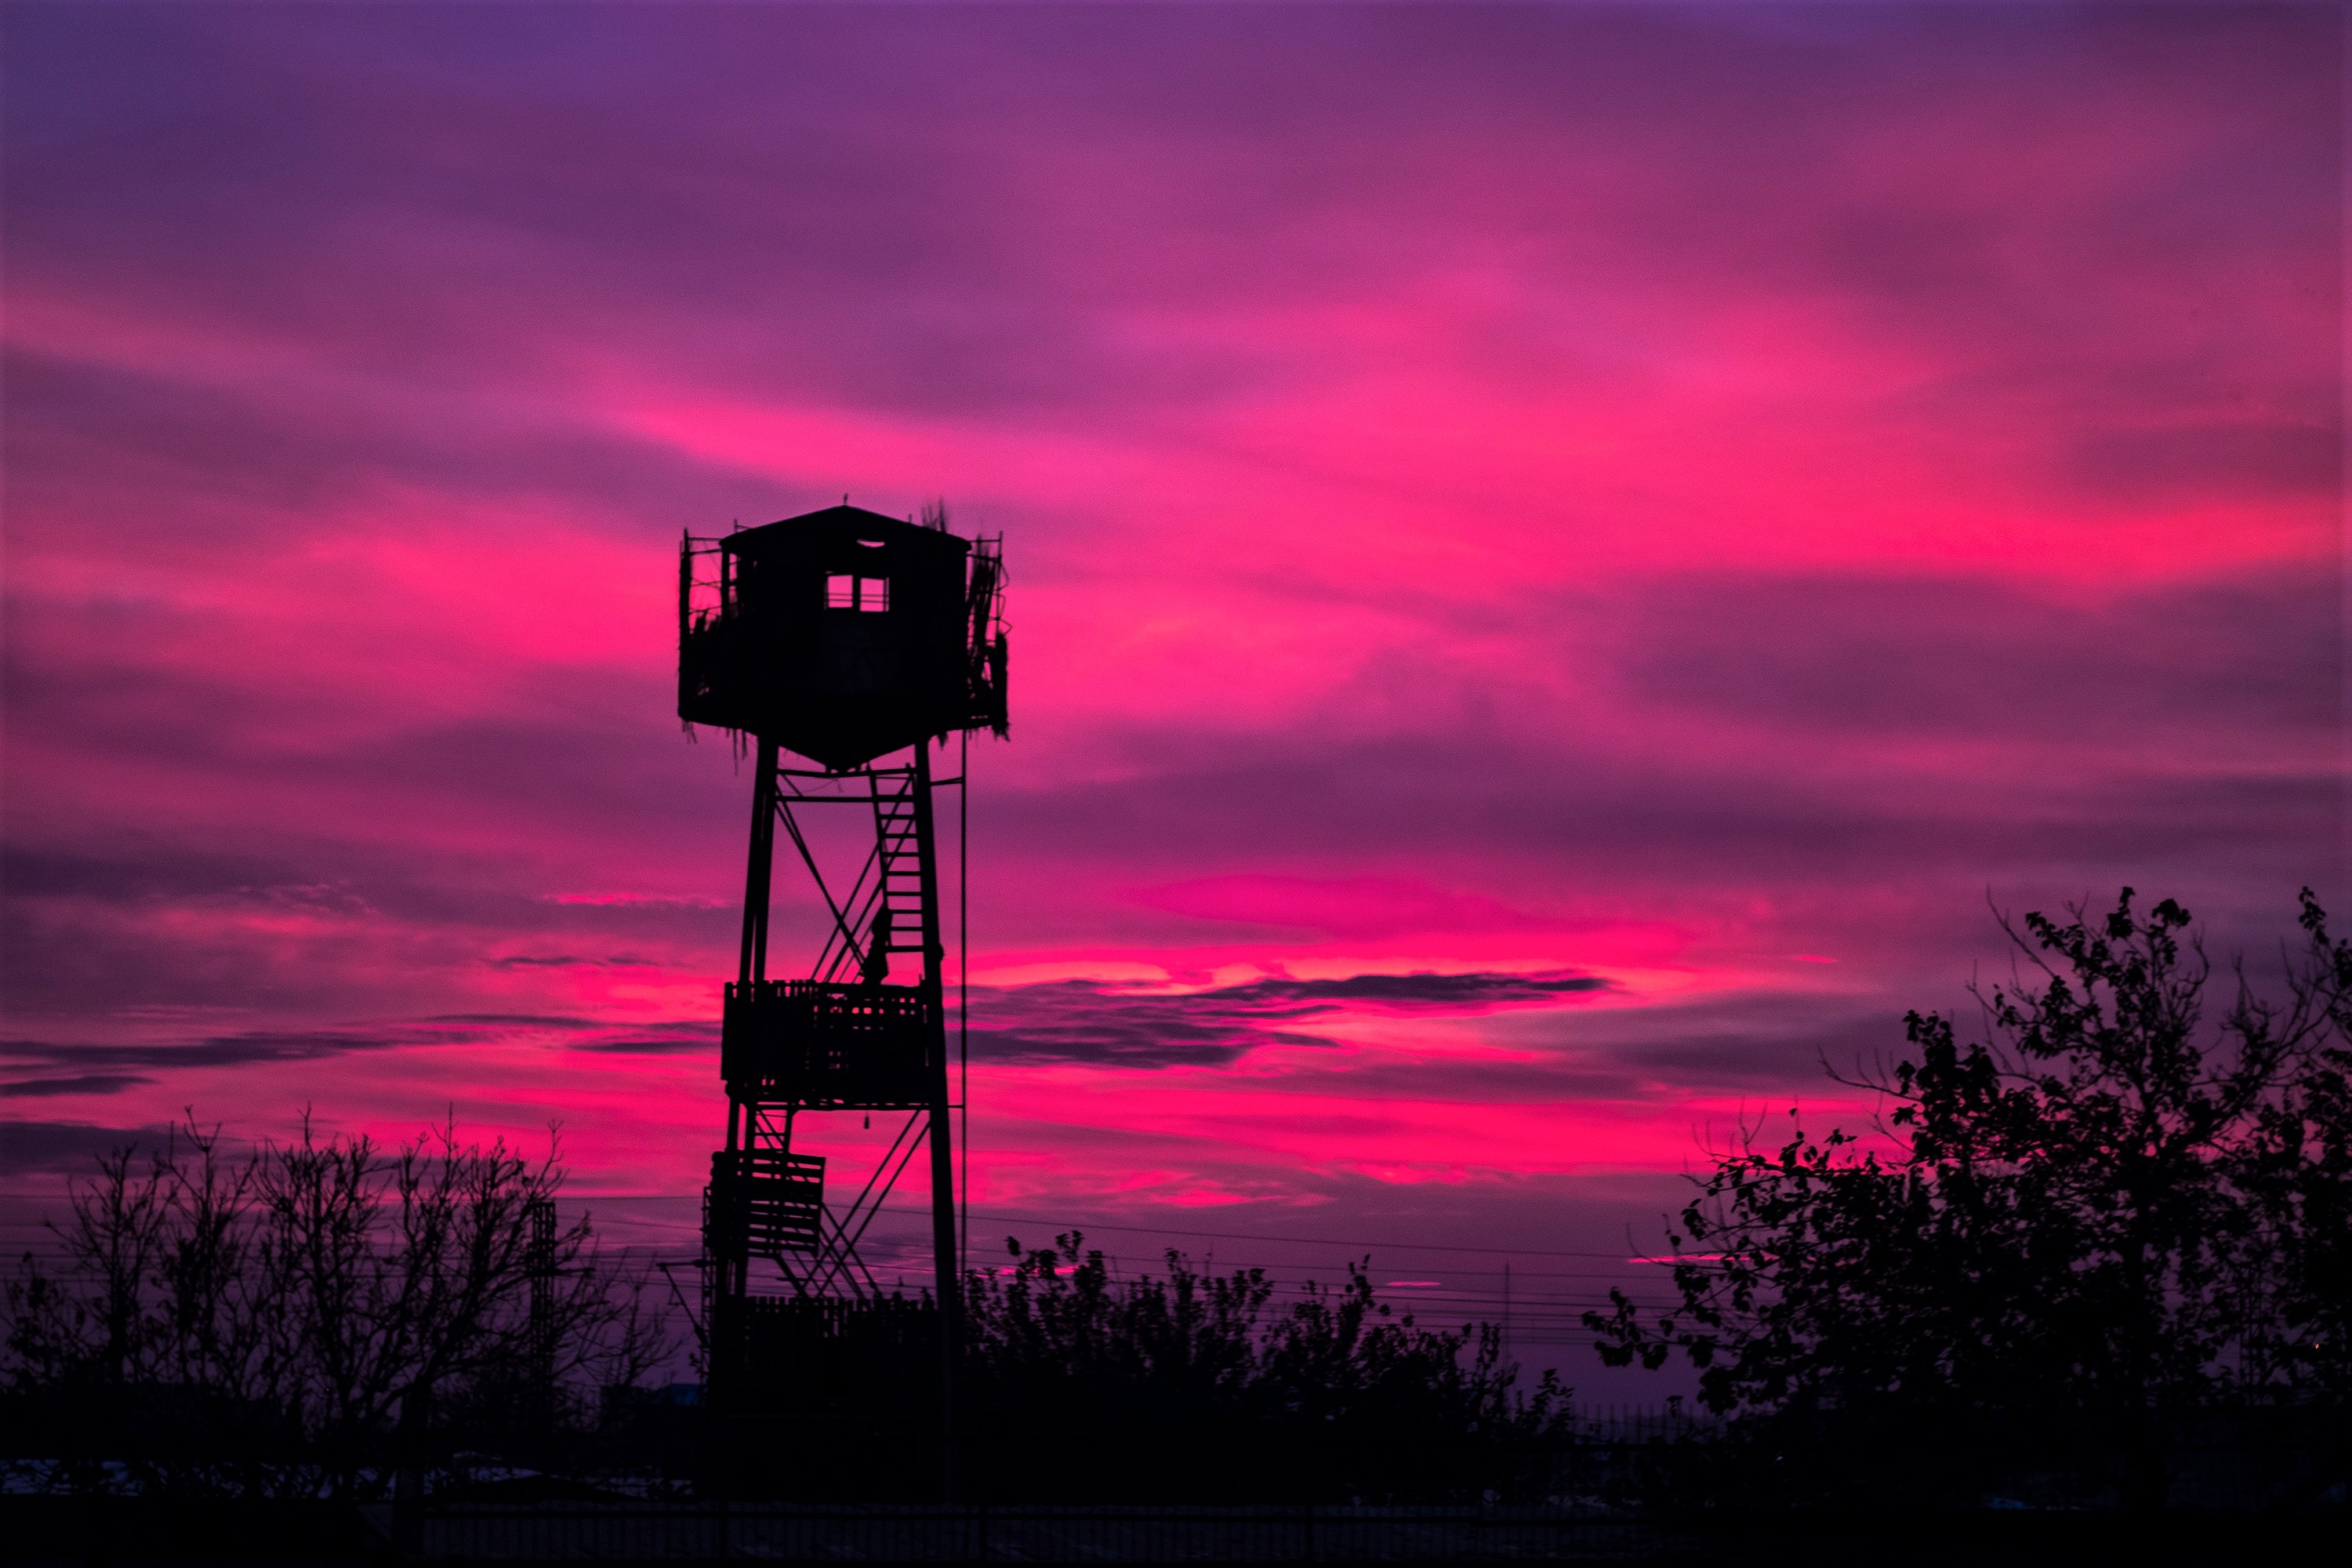 Watchtower Silhouette In Pink Sunset Hd Wallpaper Background Image 3000x00 Id Wallpaper Abyss